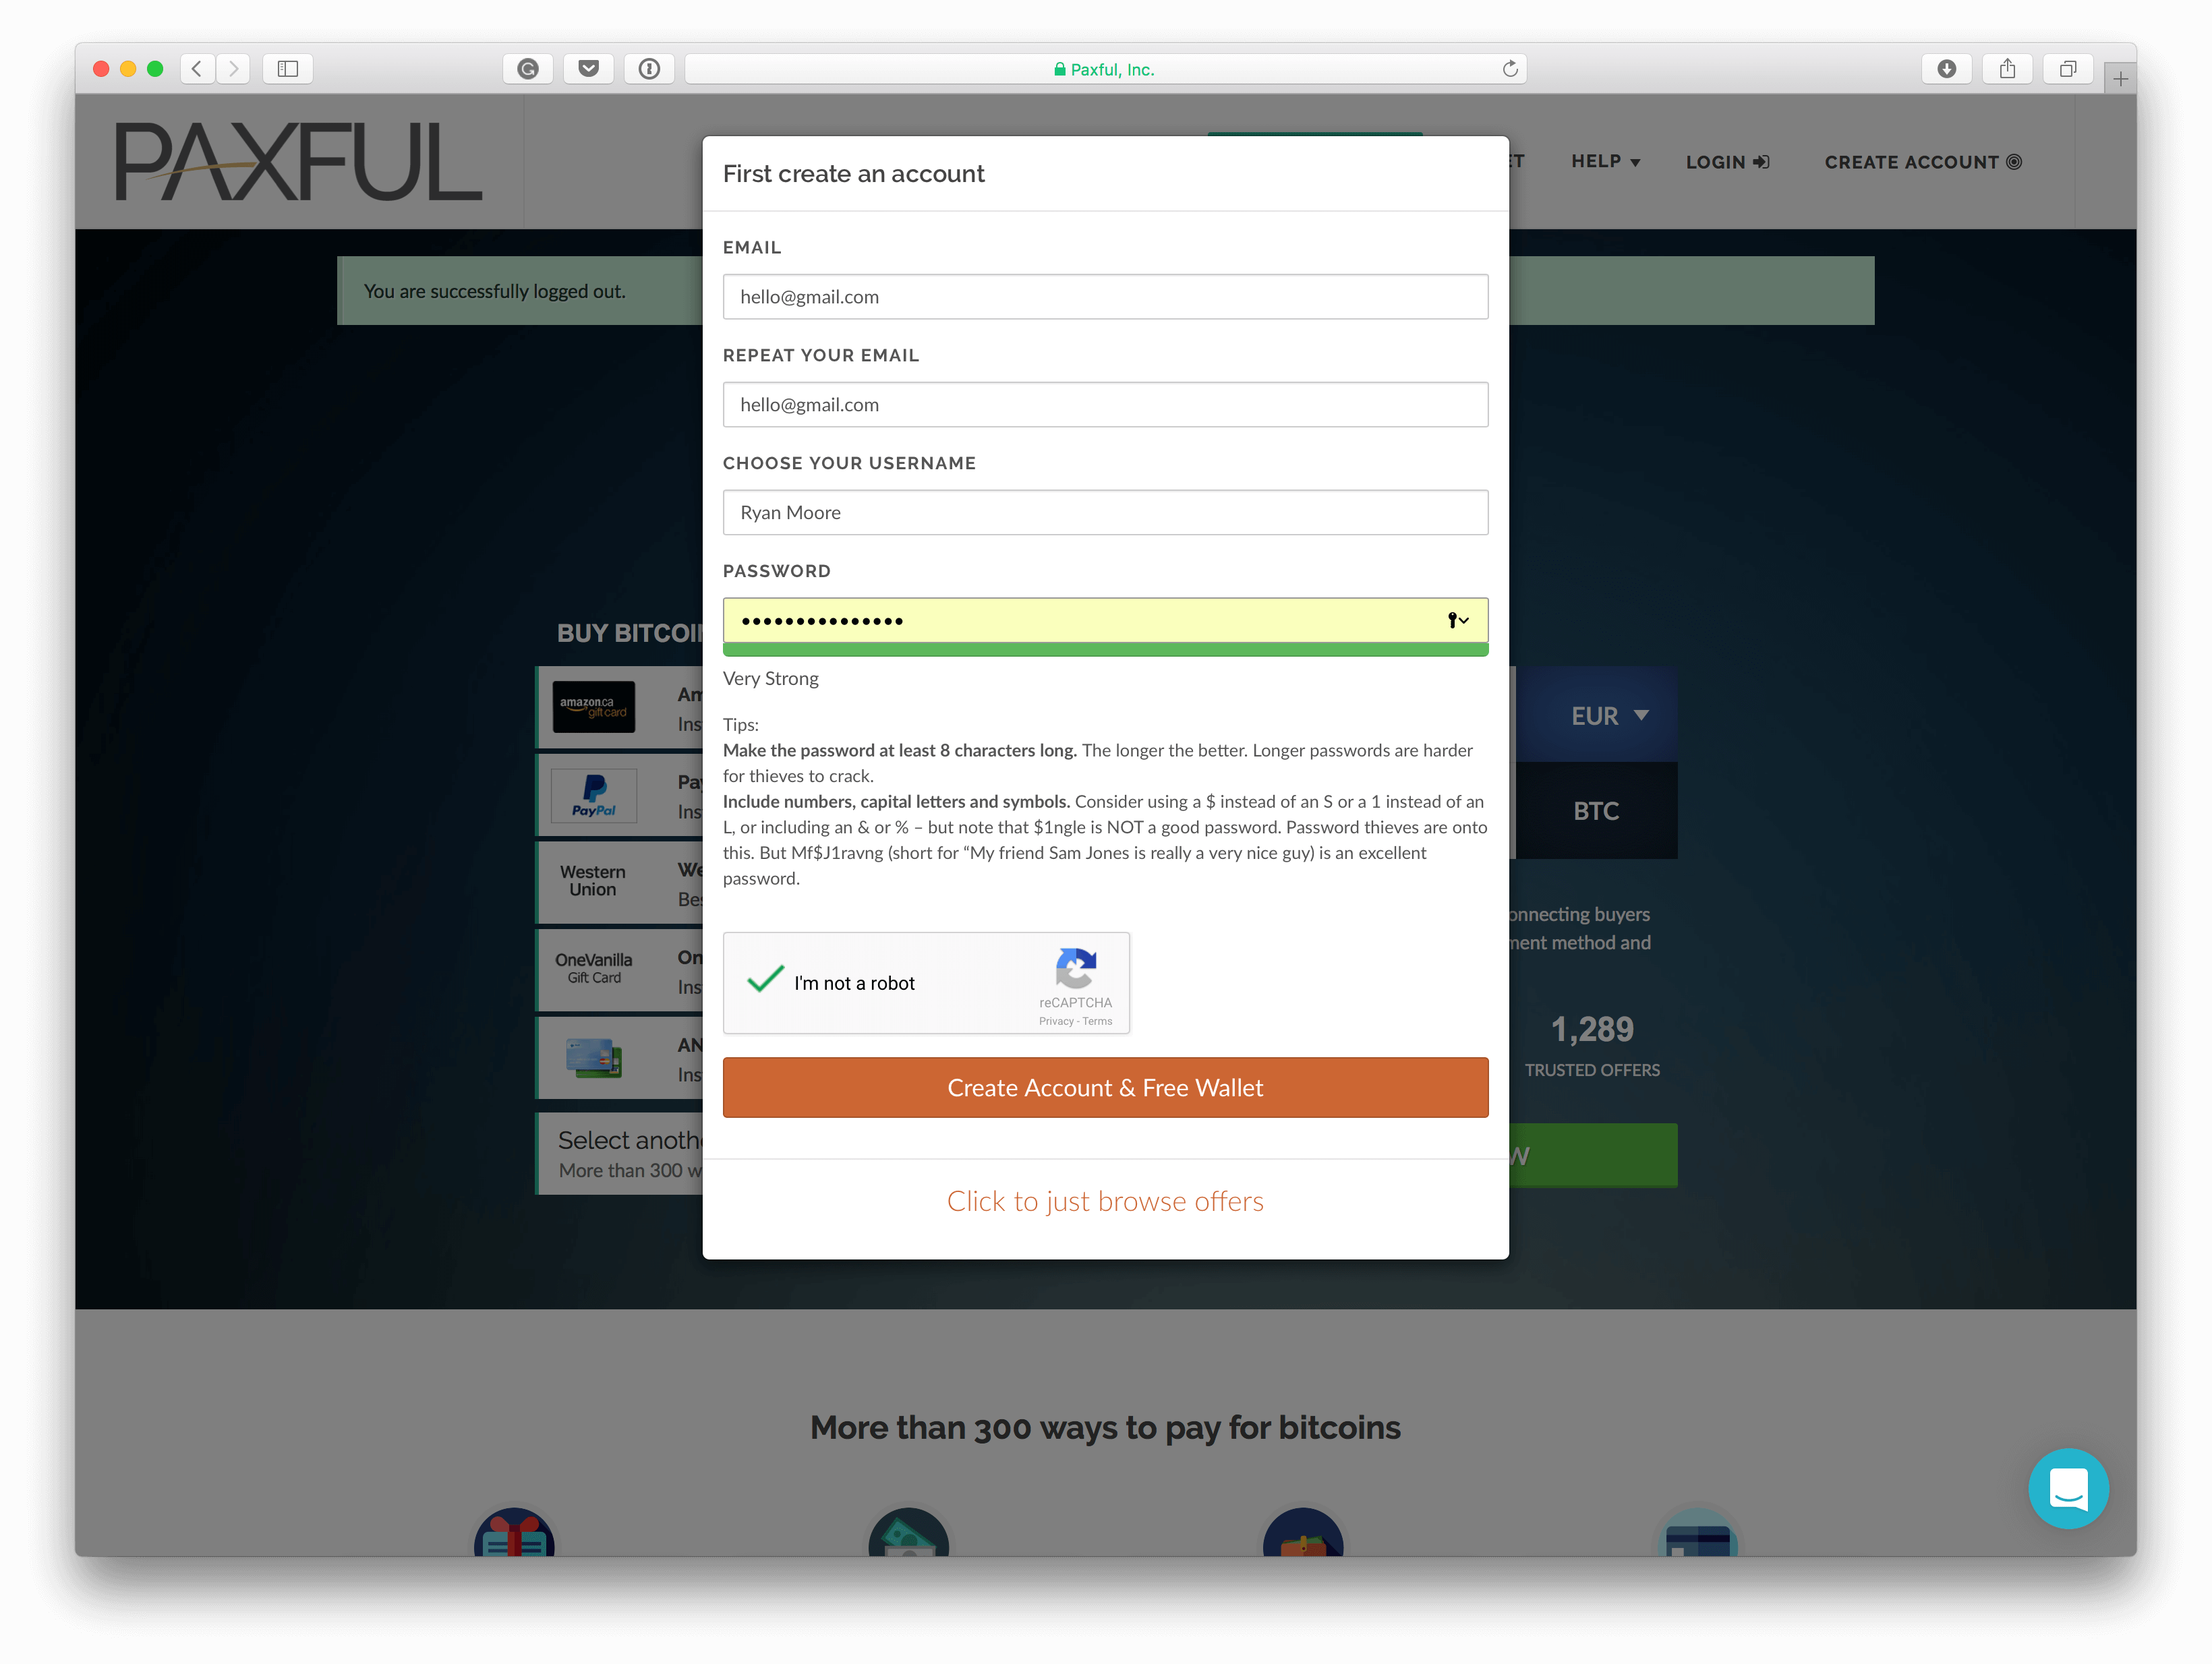 How to buy bitcoin with paypal on paxful